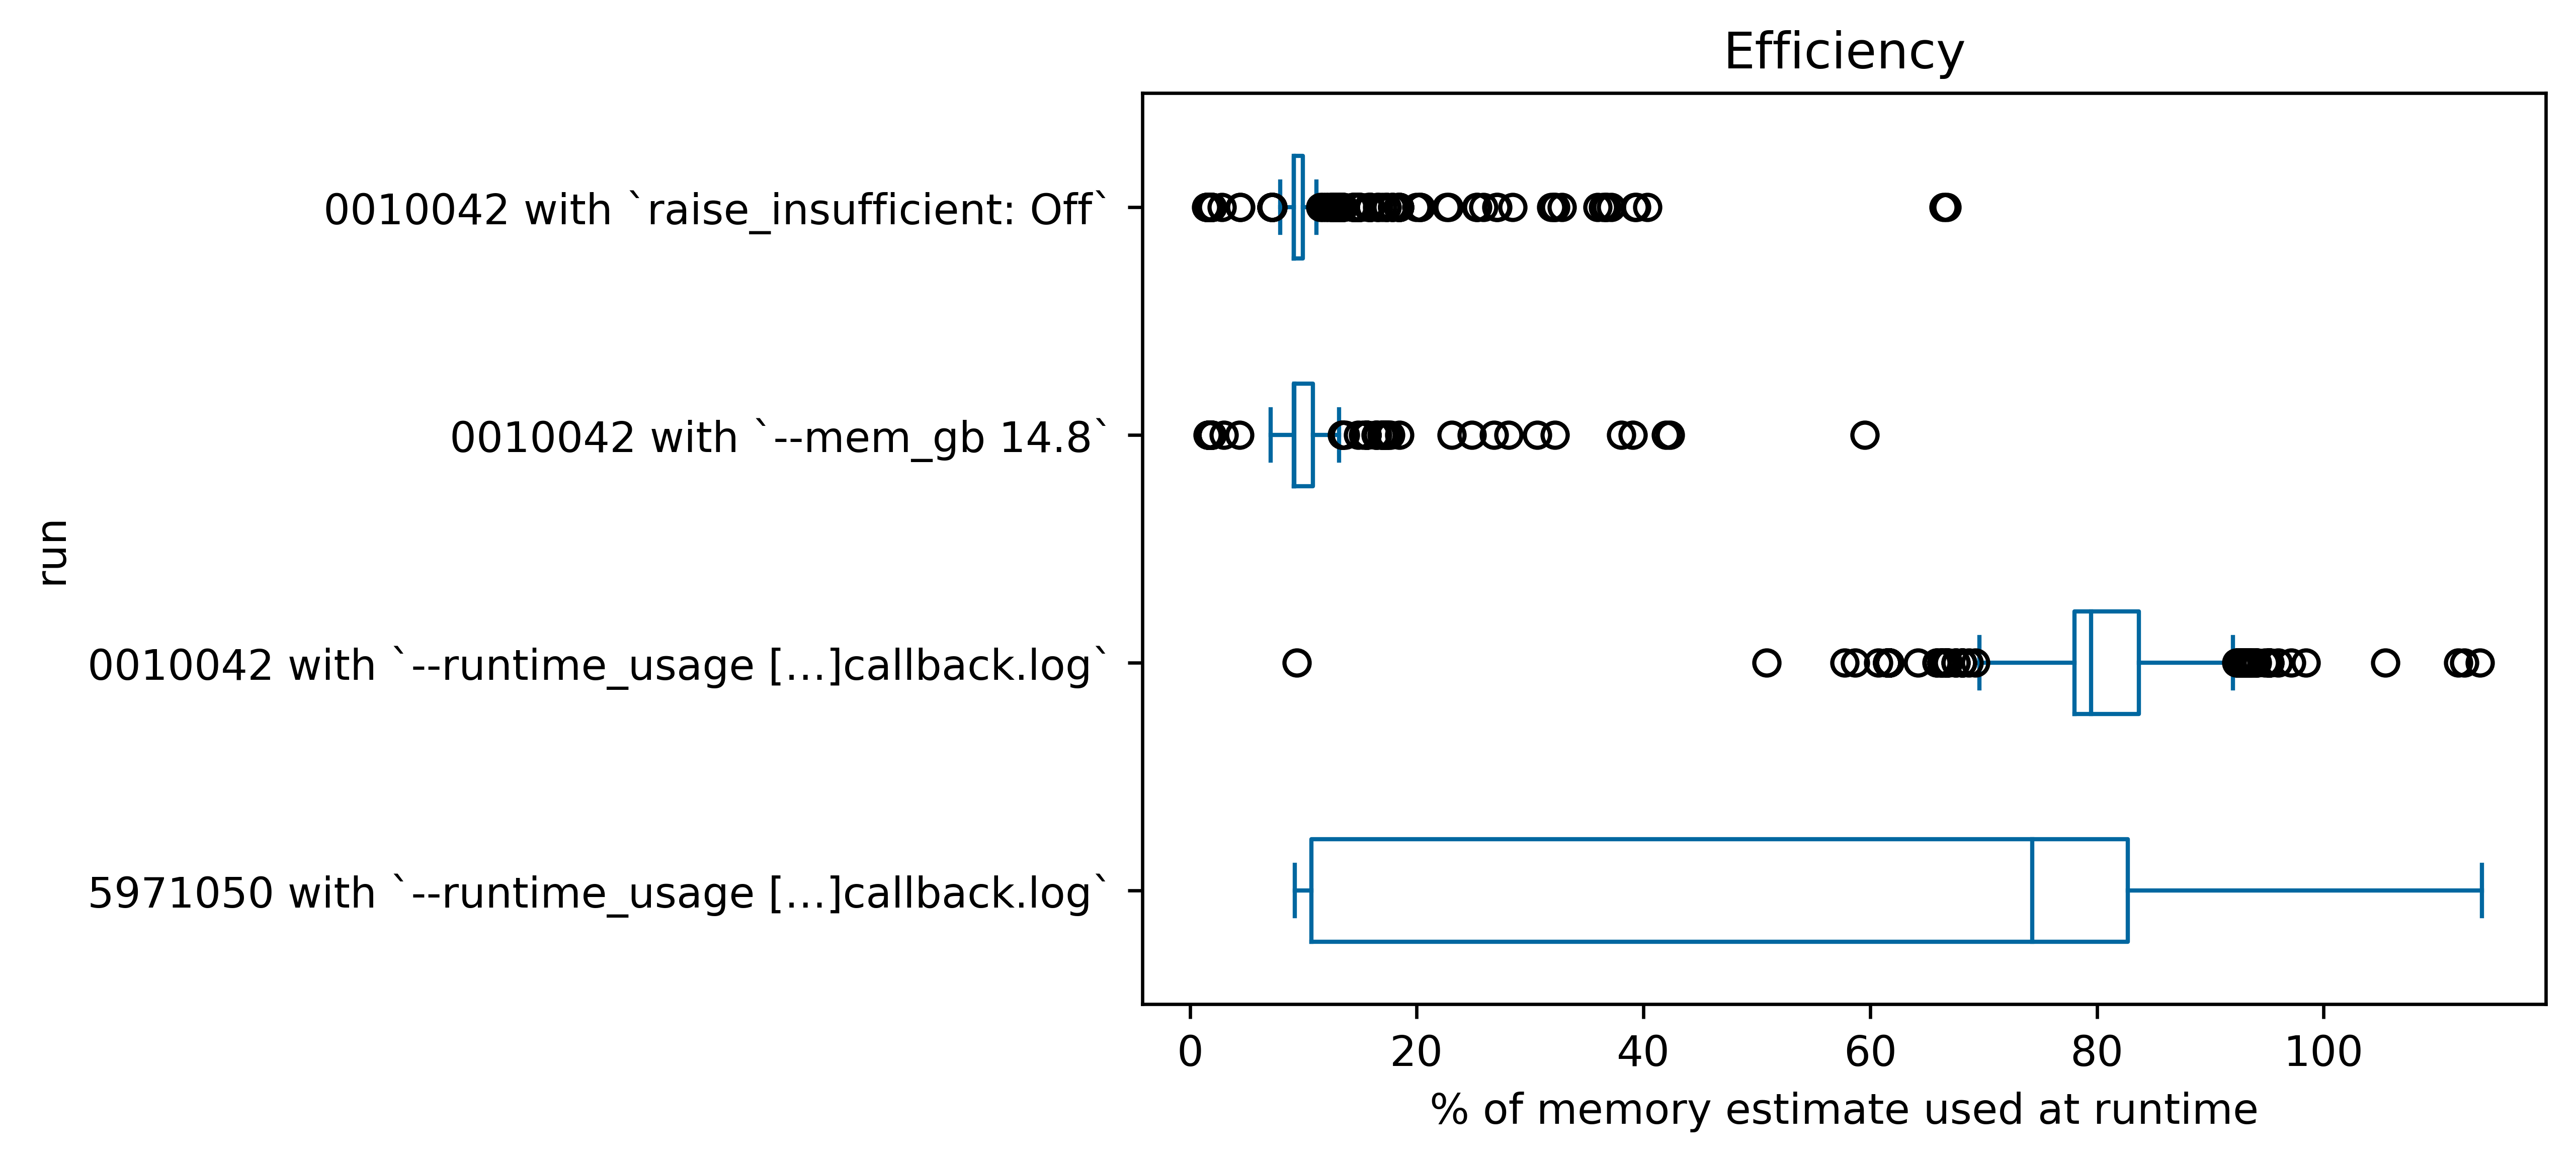 Box-and-whisker plot of efficiency